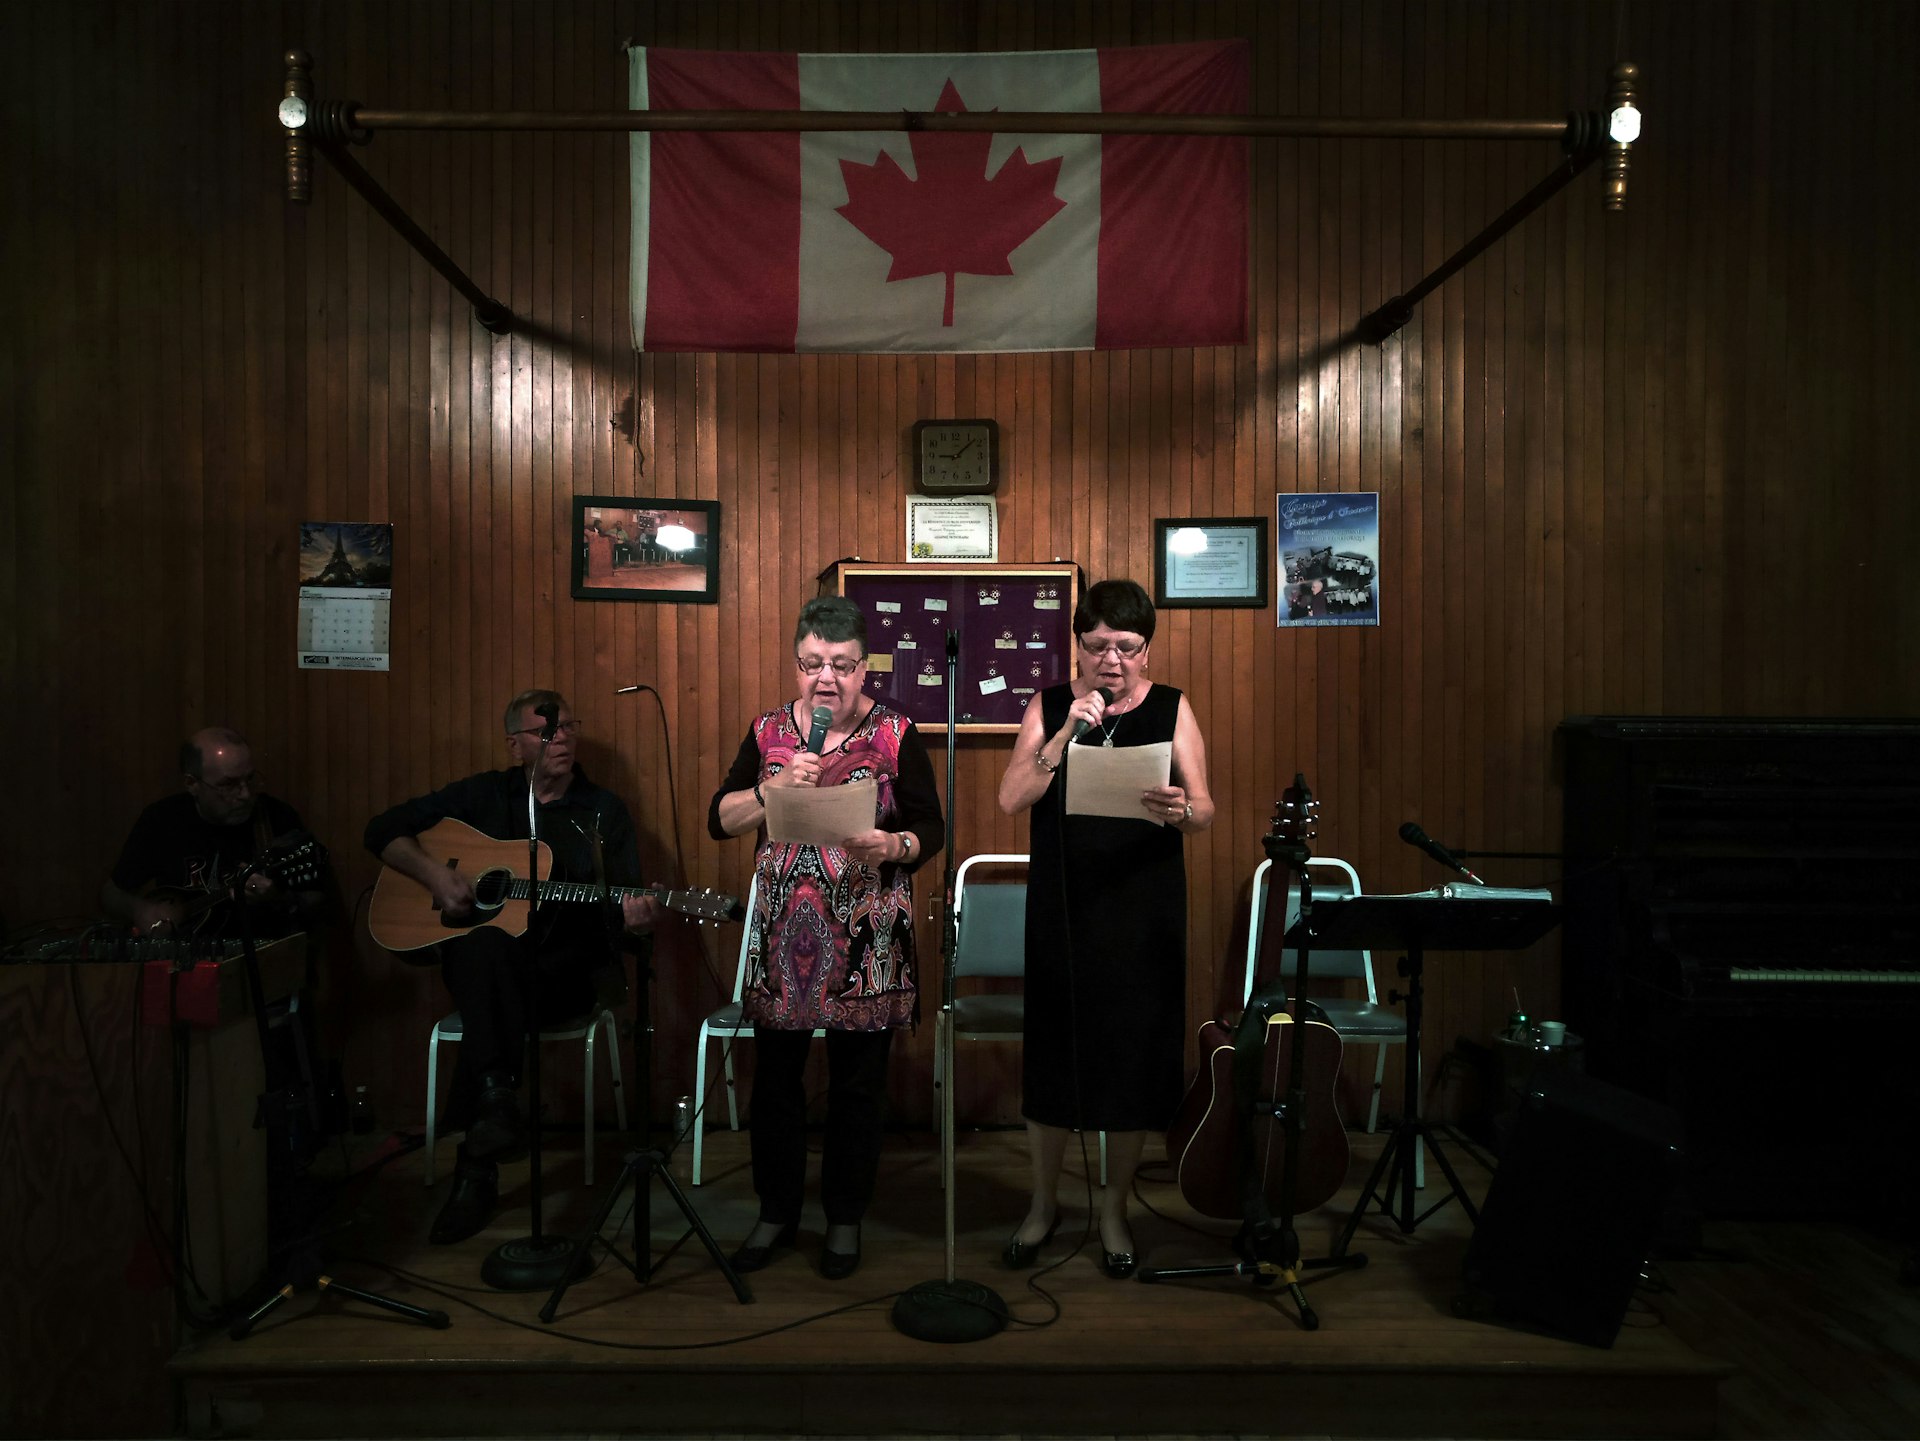 Every Friday evening folks singers and dancers gather in the Odd Fellows hall. Their repertoire includes Scottish, Irish and French melodies.